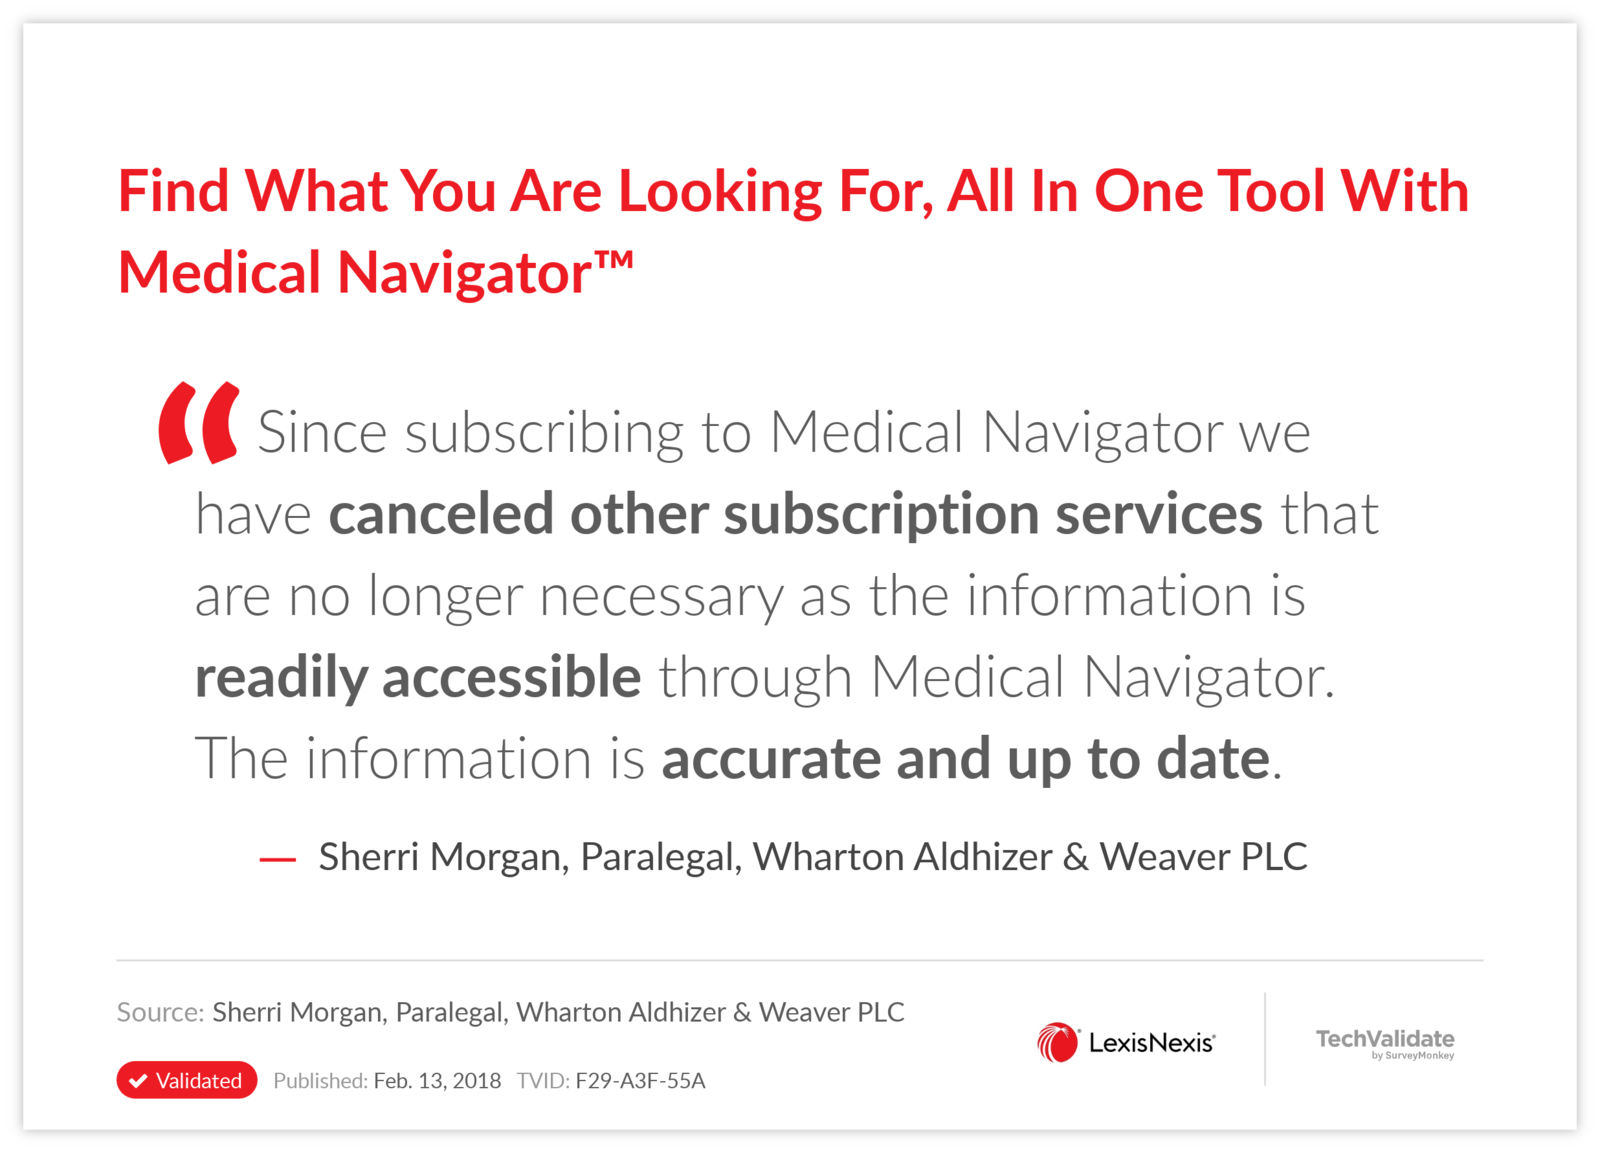 Find What You Are Looking For, All In One Tool With Medical Navigator(TM)